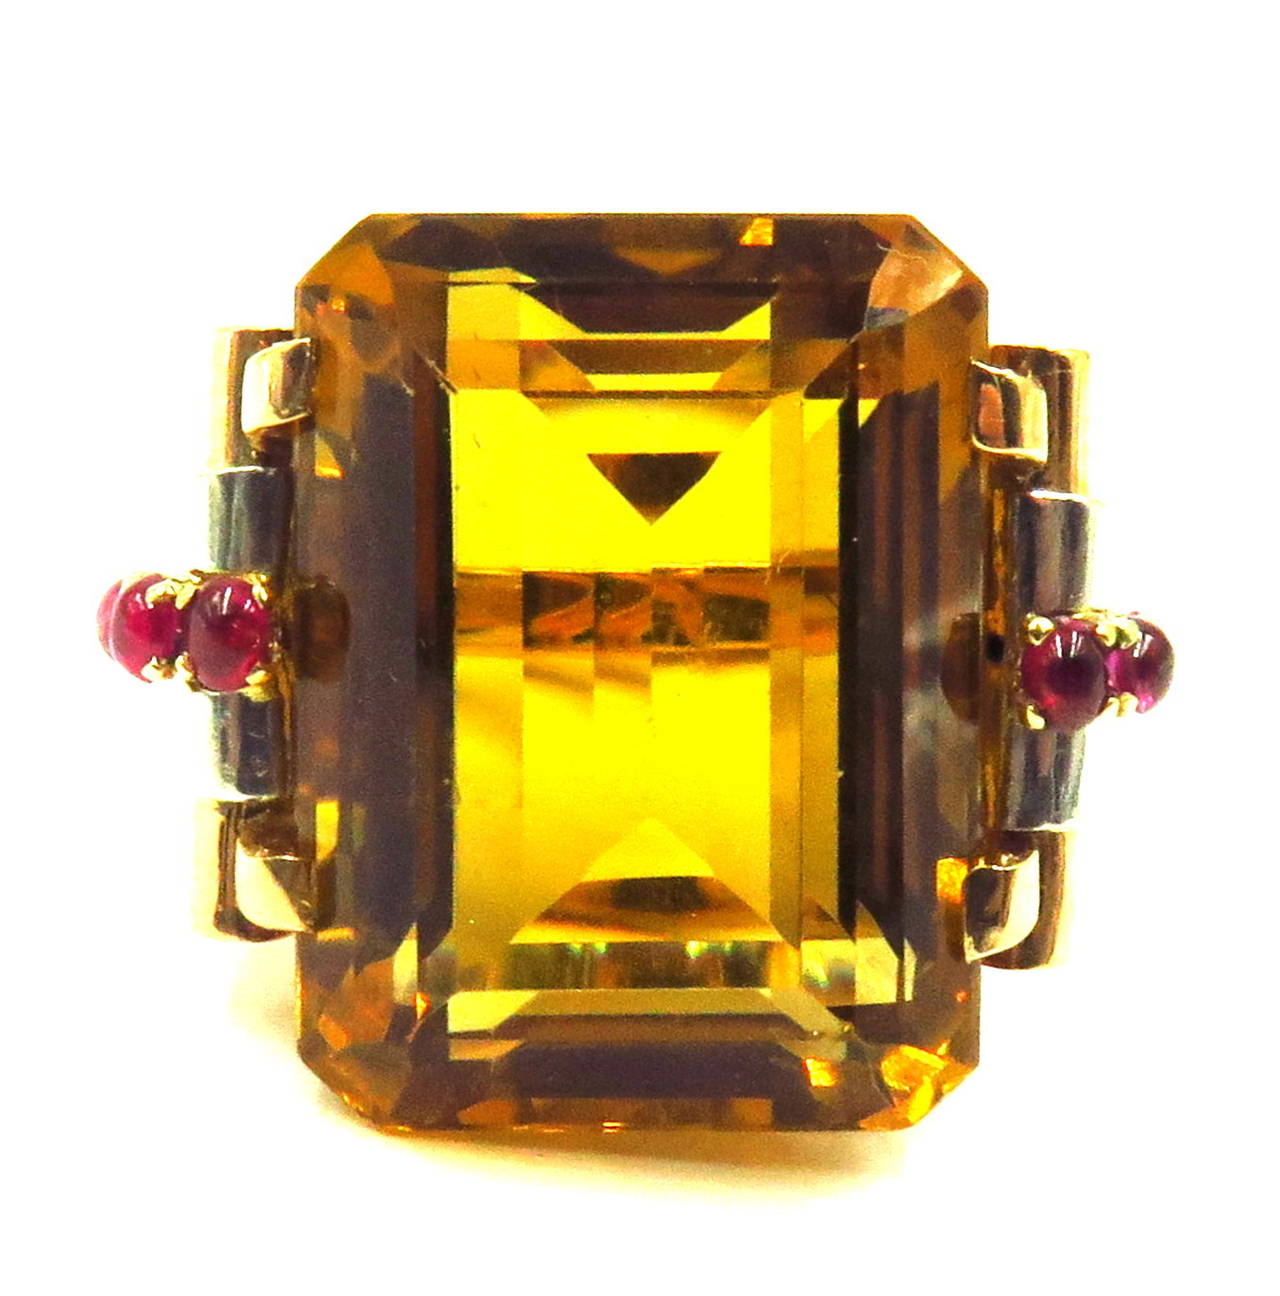 Exceptional example of a classic 1940's era ring. The mounting is in 14k rose gold with platinum accents to show off the 4 cabochon cut rubies on each side.
The citrine is a beautifully step cut stone approximately 30ct 
This ring is size 8. and